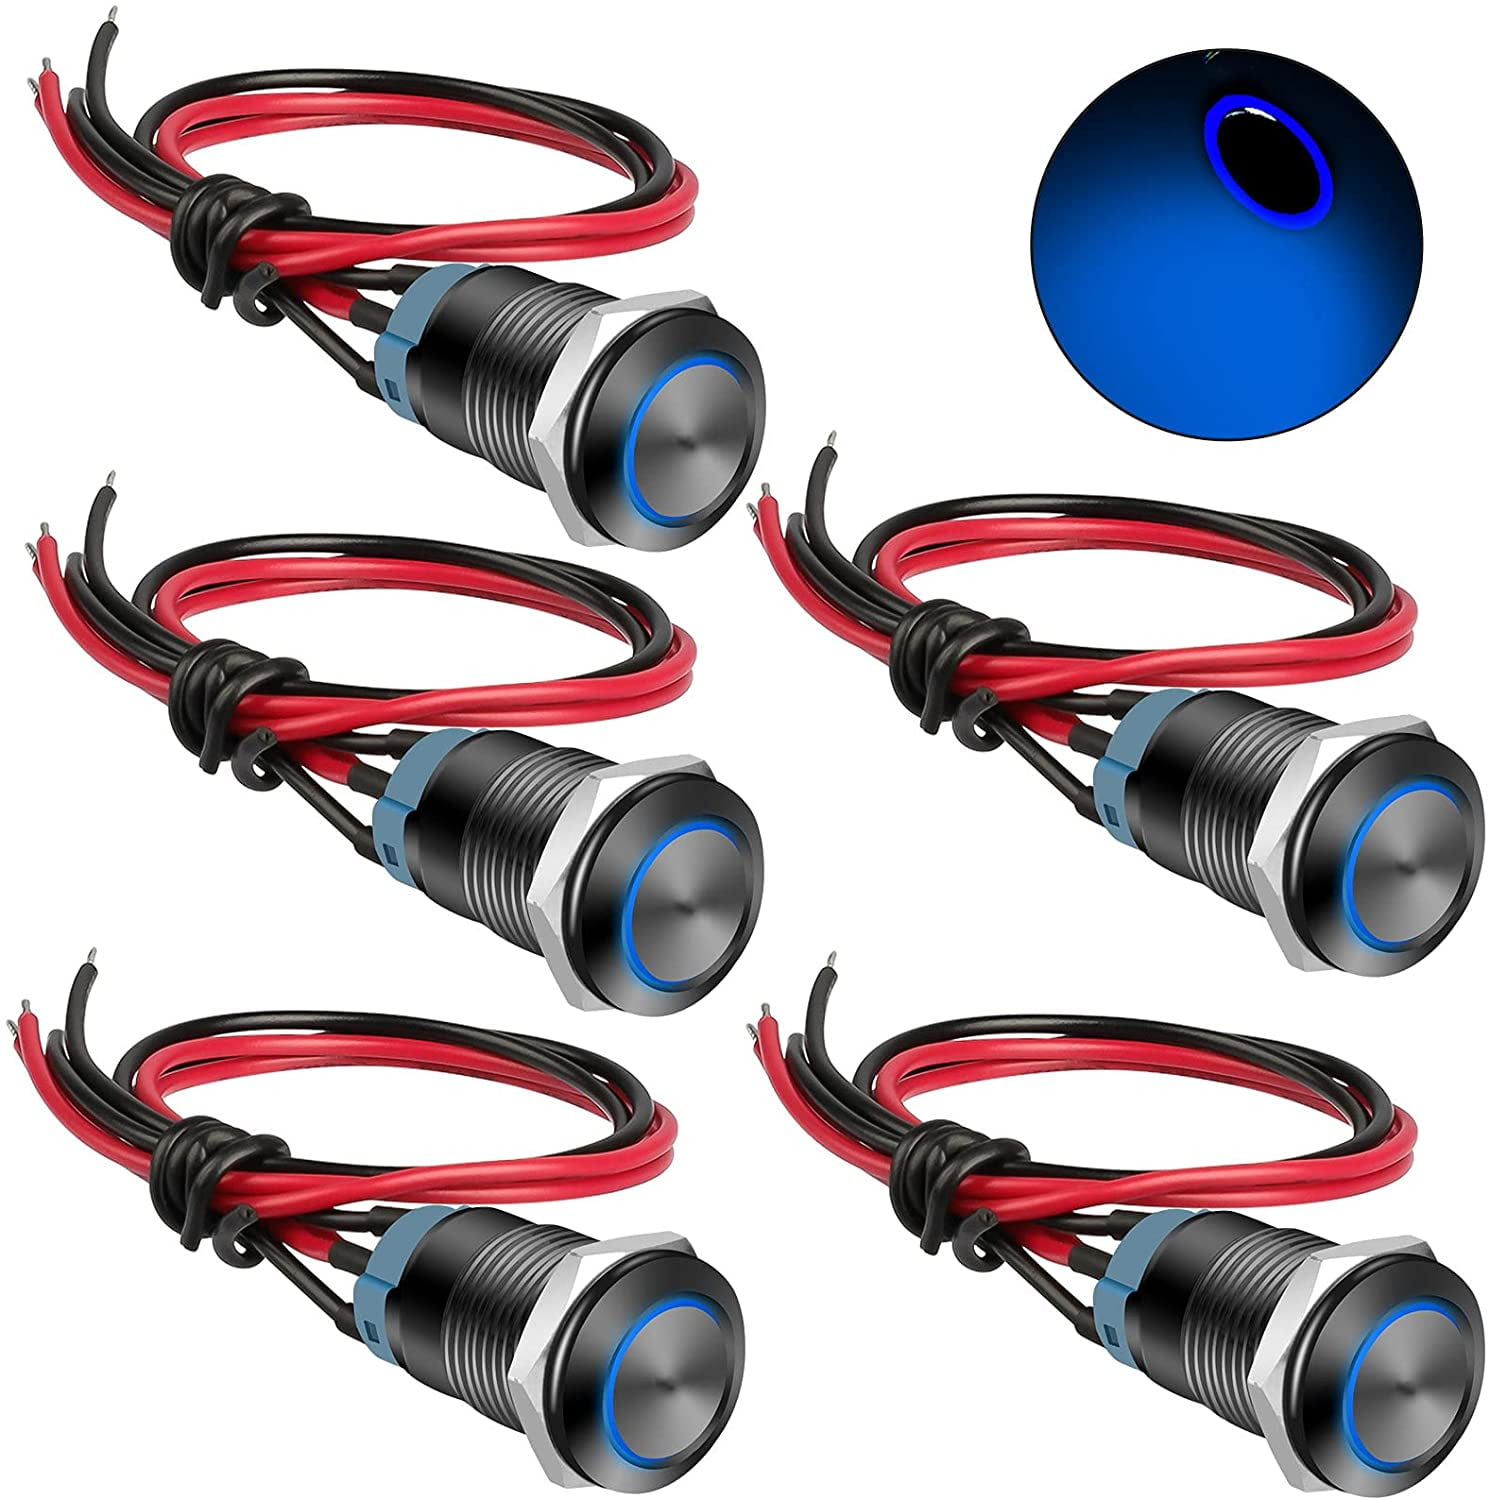 Push Button Switch Waterproof On-Off Light Wired Switches 12V For Motorcycle/Car 5Pcs Black 